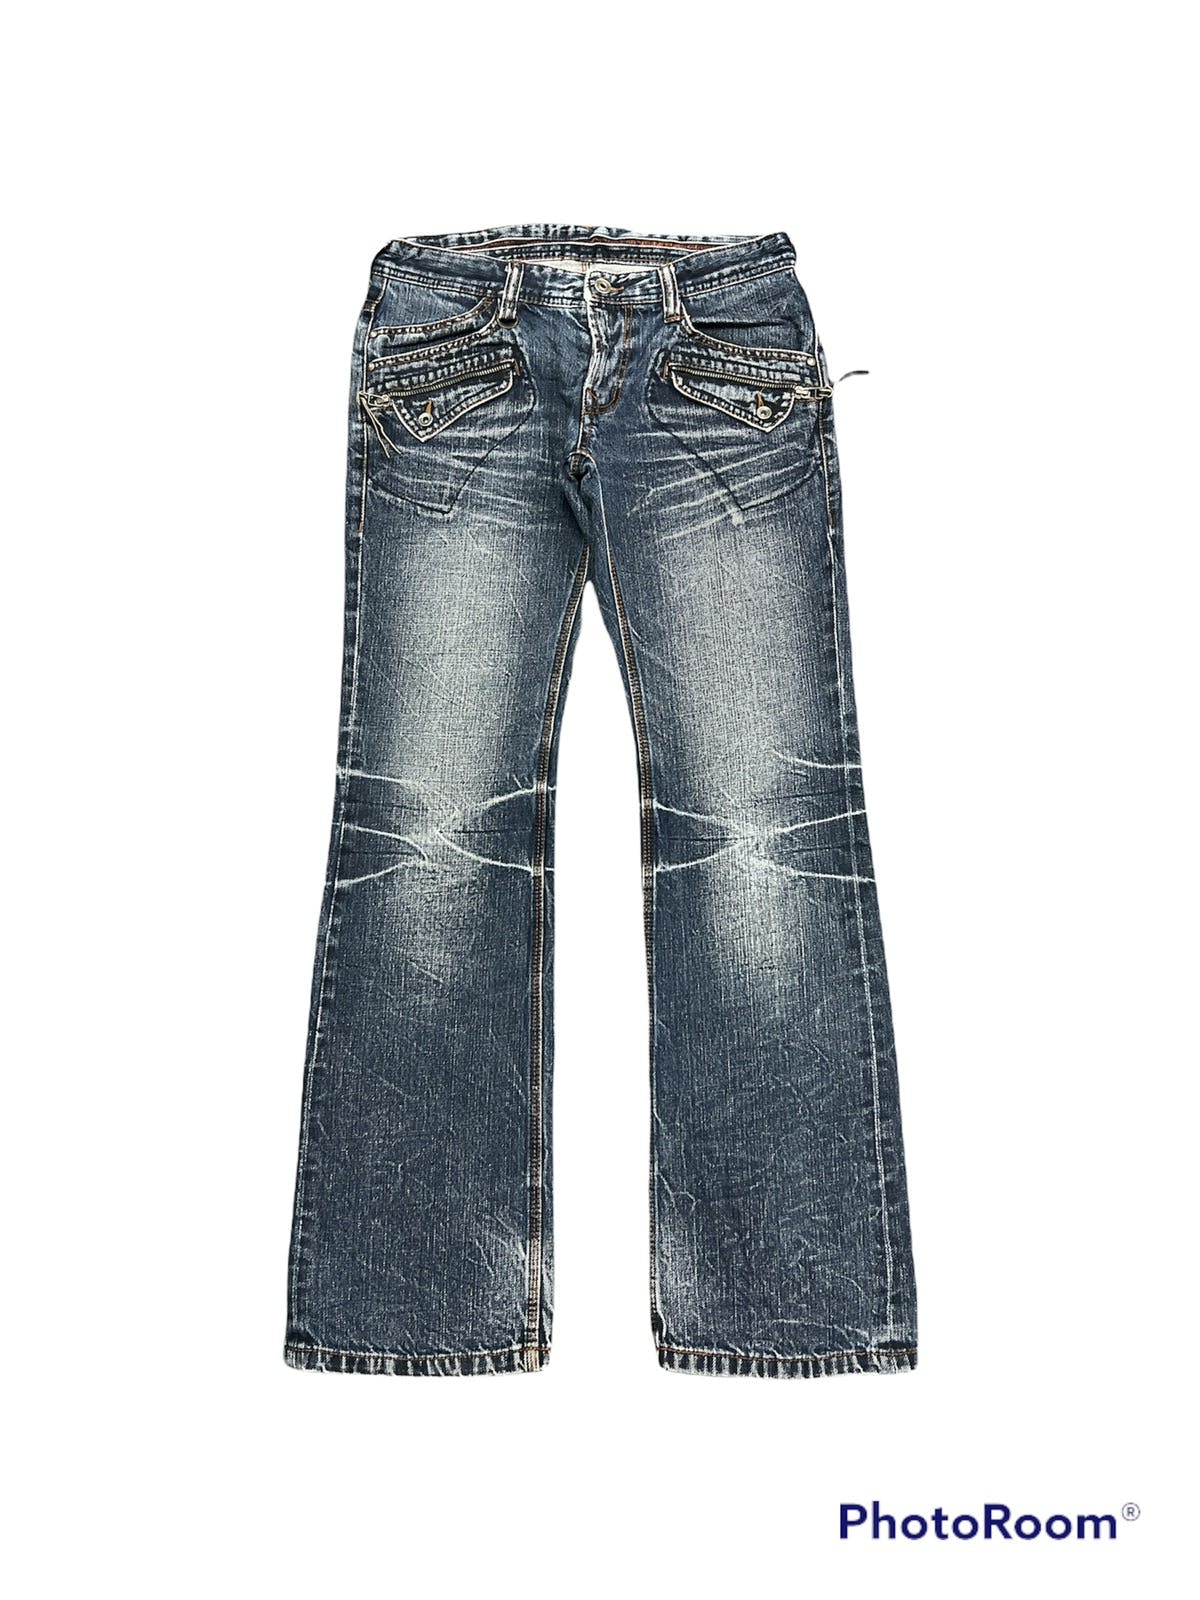 Distressed Japan Blue Flare by Nicole Club For Men Denim - 2